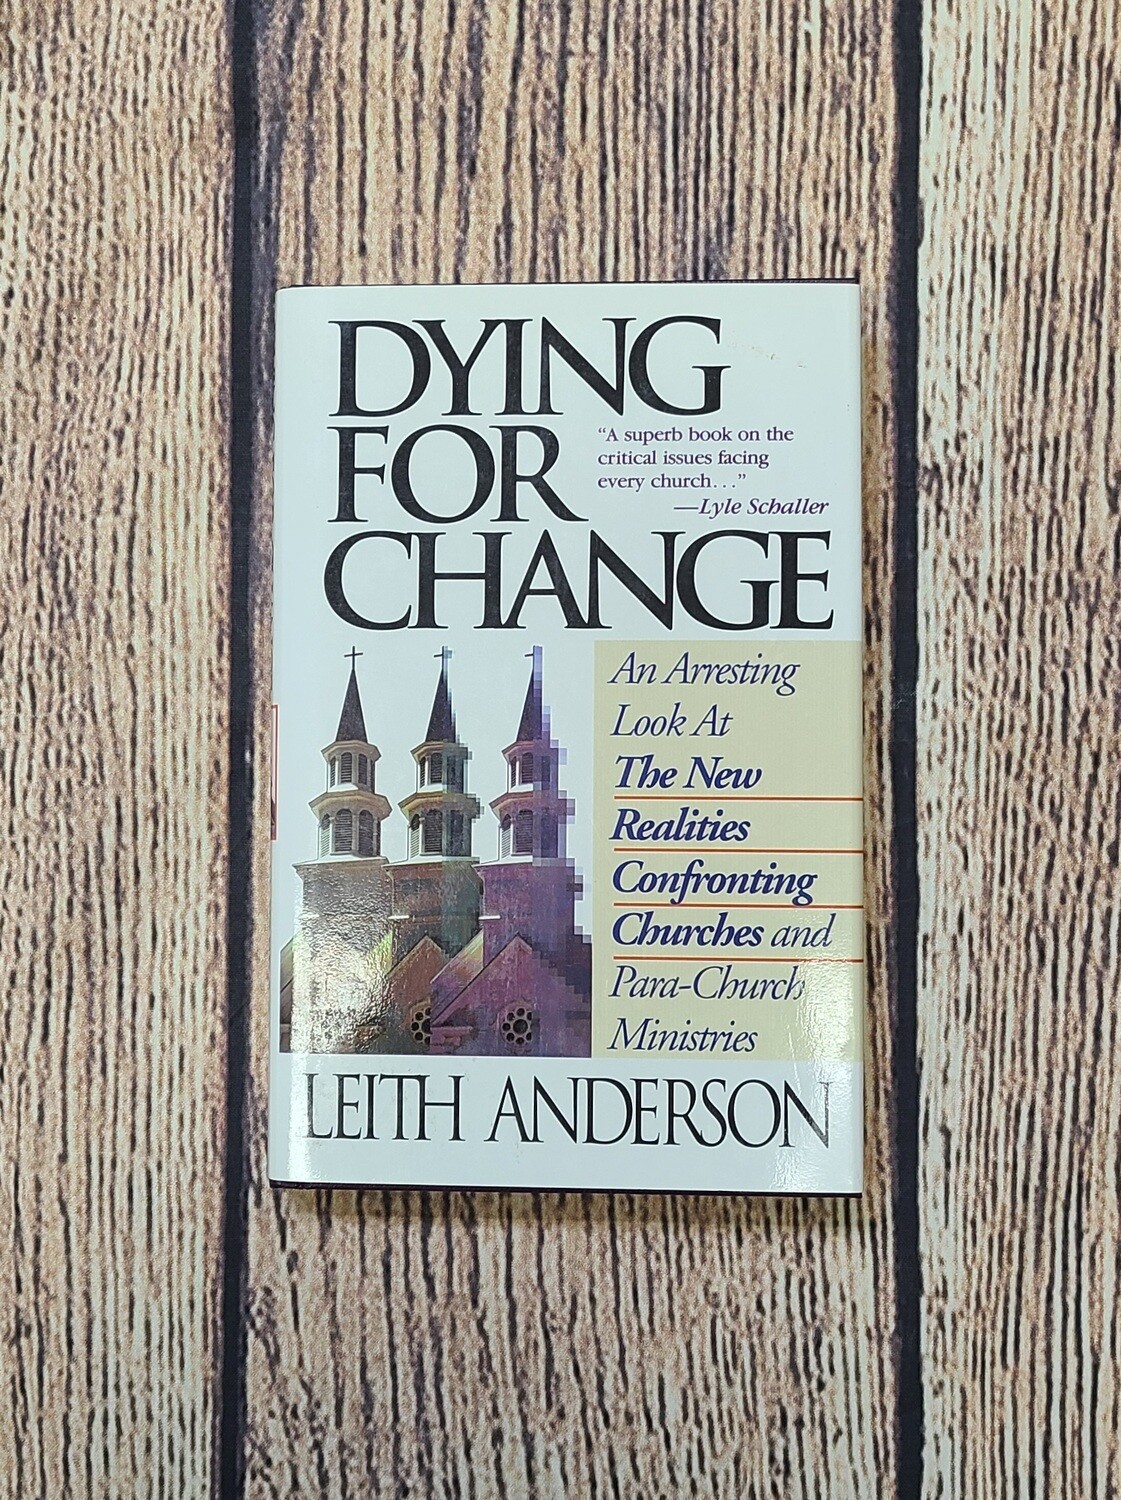 Dying For Change by Leith Anderson